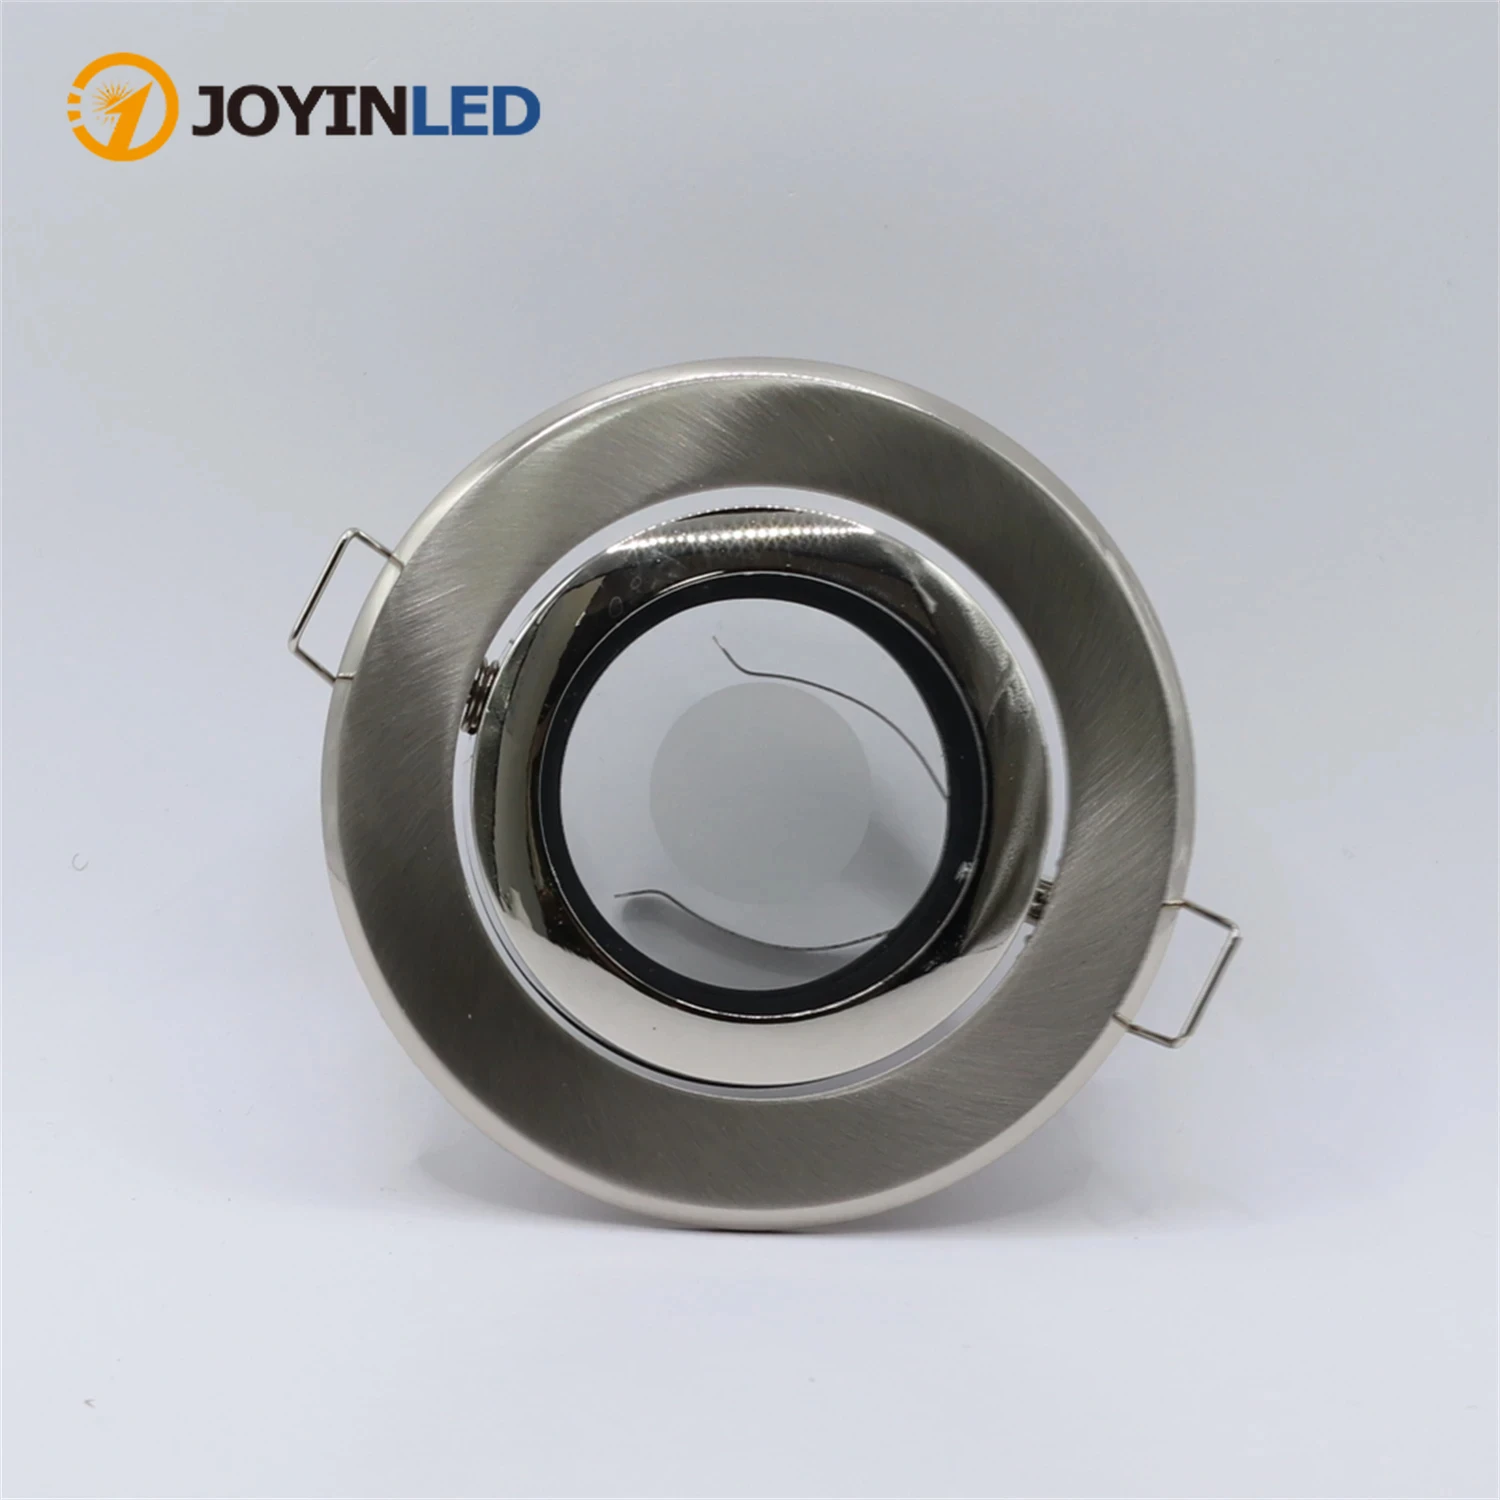 

Zinc Alloy IP44 Recessed Ceiling Downlight Holder GU10 MR16 Cut Out 85mm Fixture Frame Background Lamps